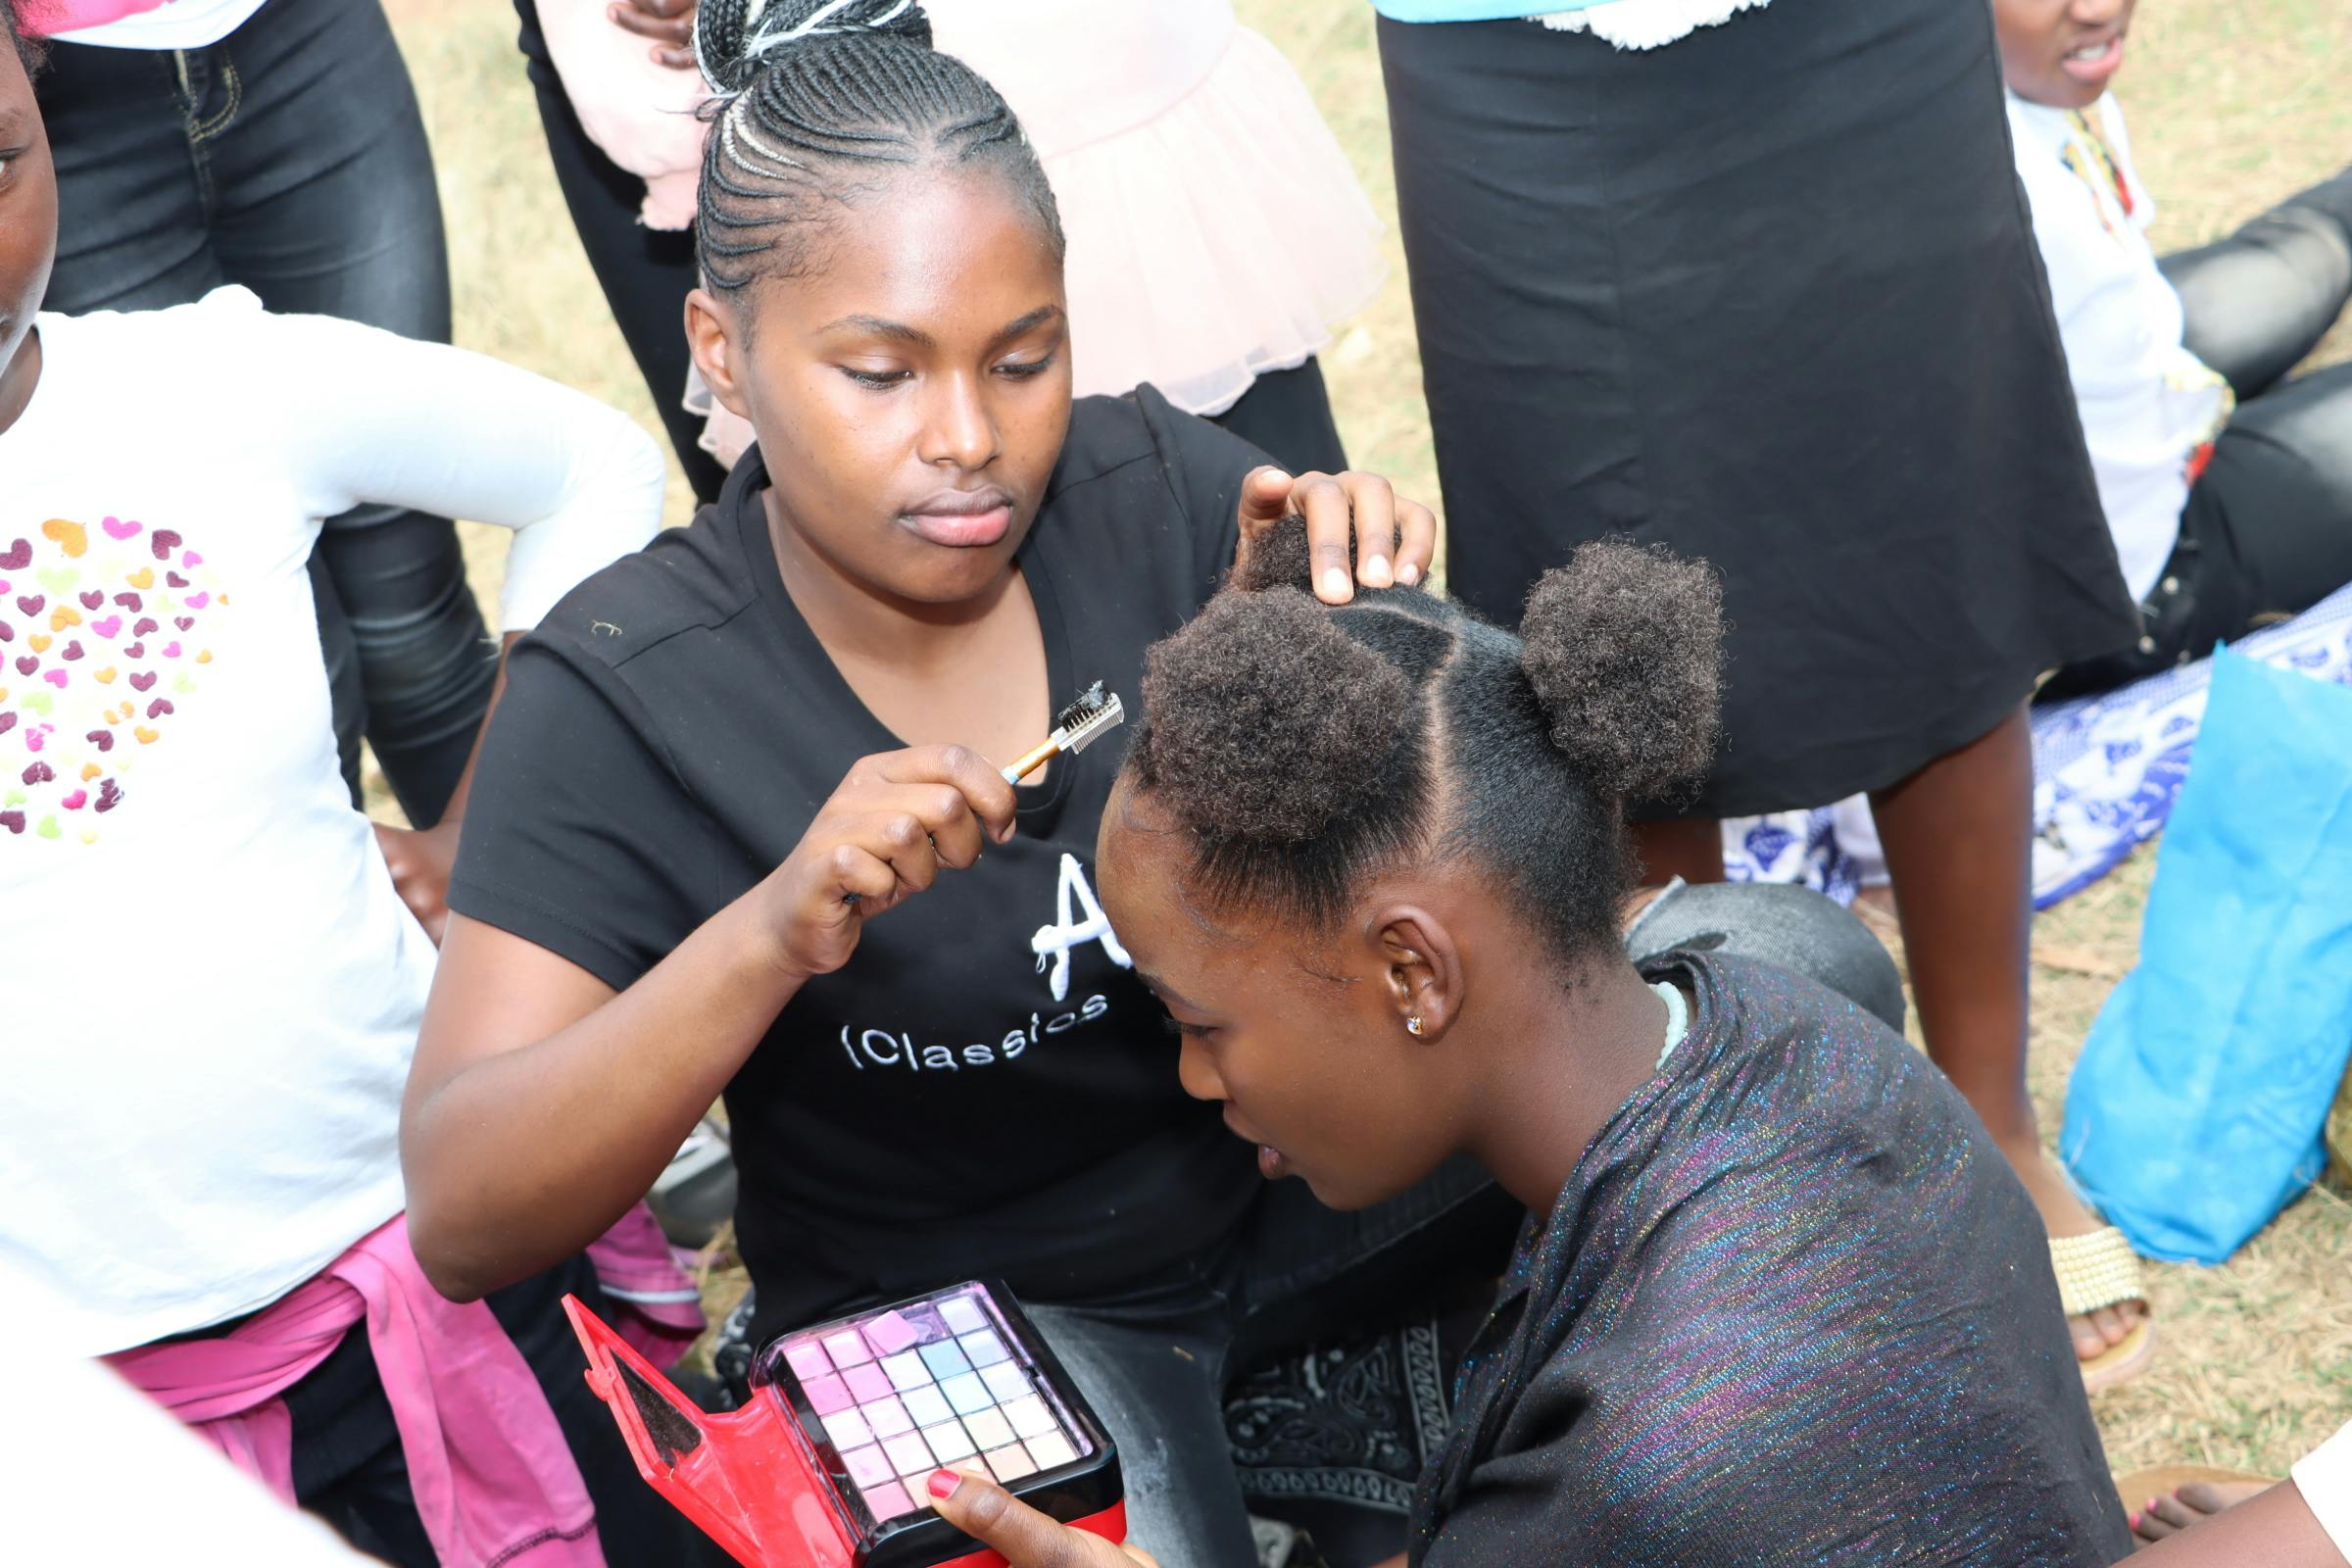 DREAMS girl using her make up skills to prep one of the girls during an "End GBV" advocacy event.